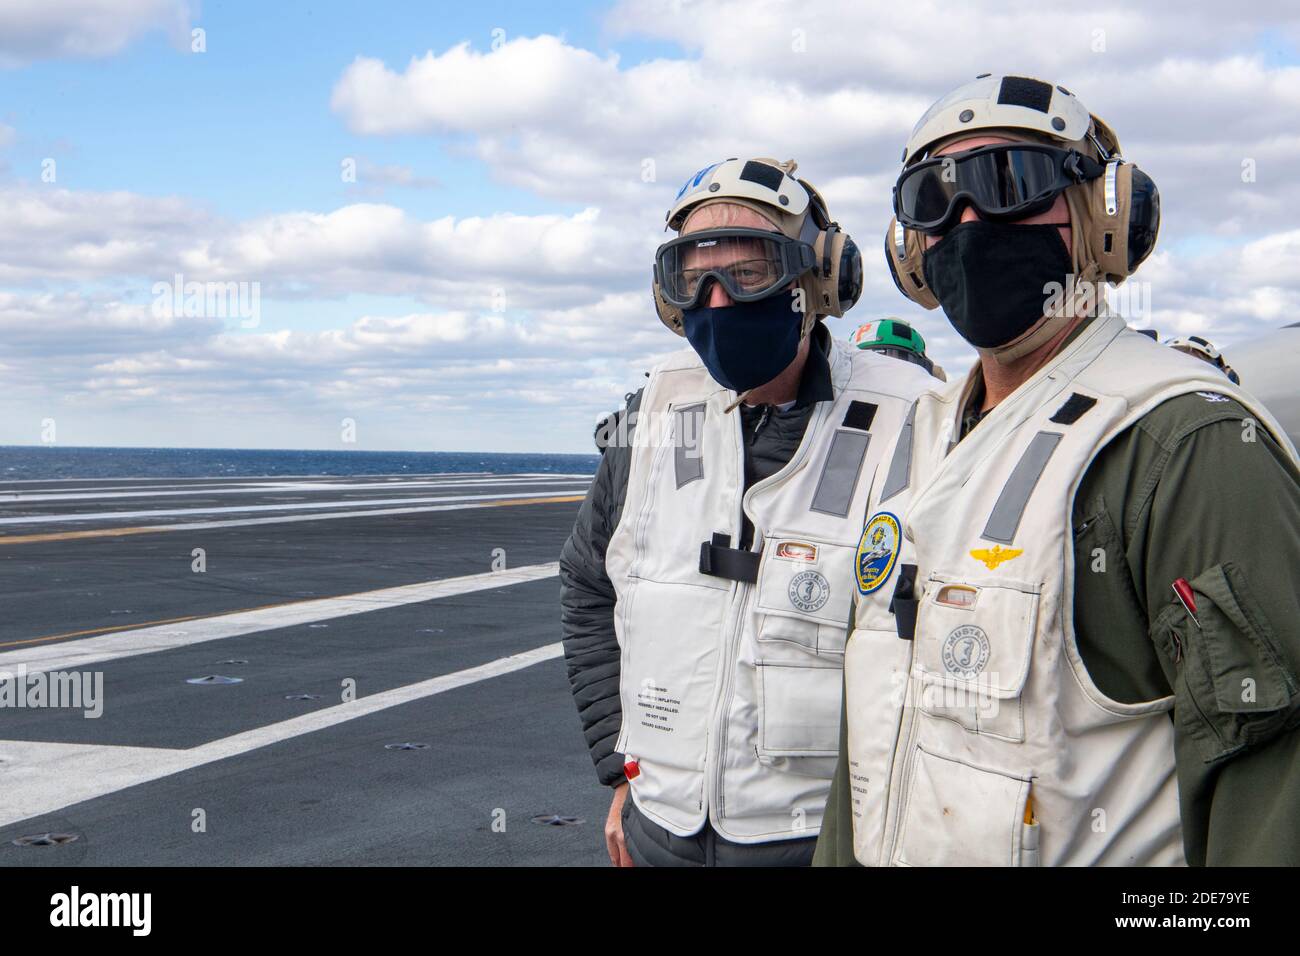 U.S. Acting Secretary of Defense Christopher Miller, left, stands on the flight deck of the Ford class nuclear aircraft carrier USS Gerald R. Ford during a visit to the ship November 18, 2020 in the Atlantic Ocean. Stock Photo